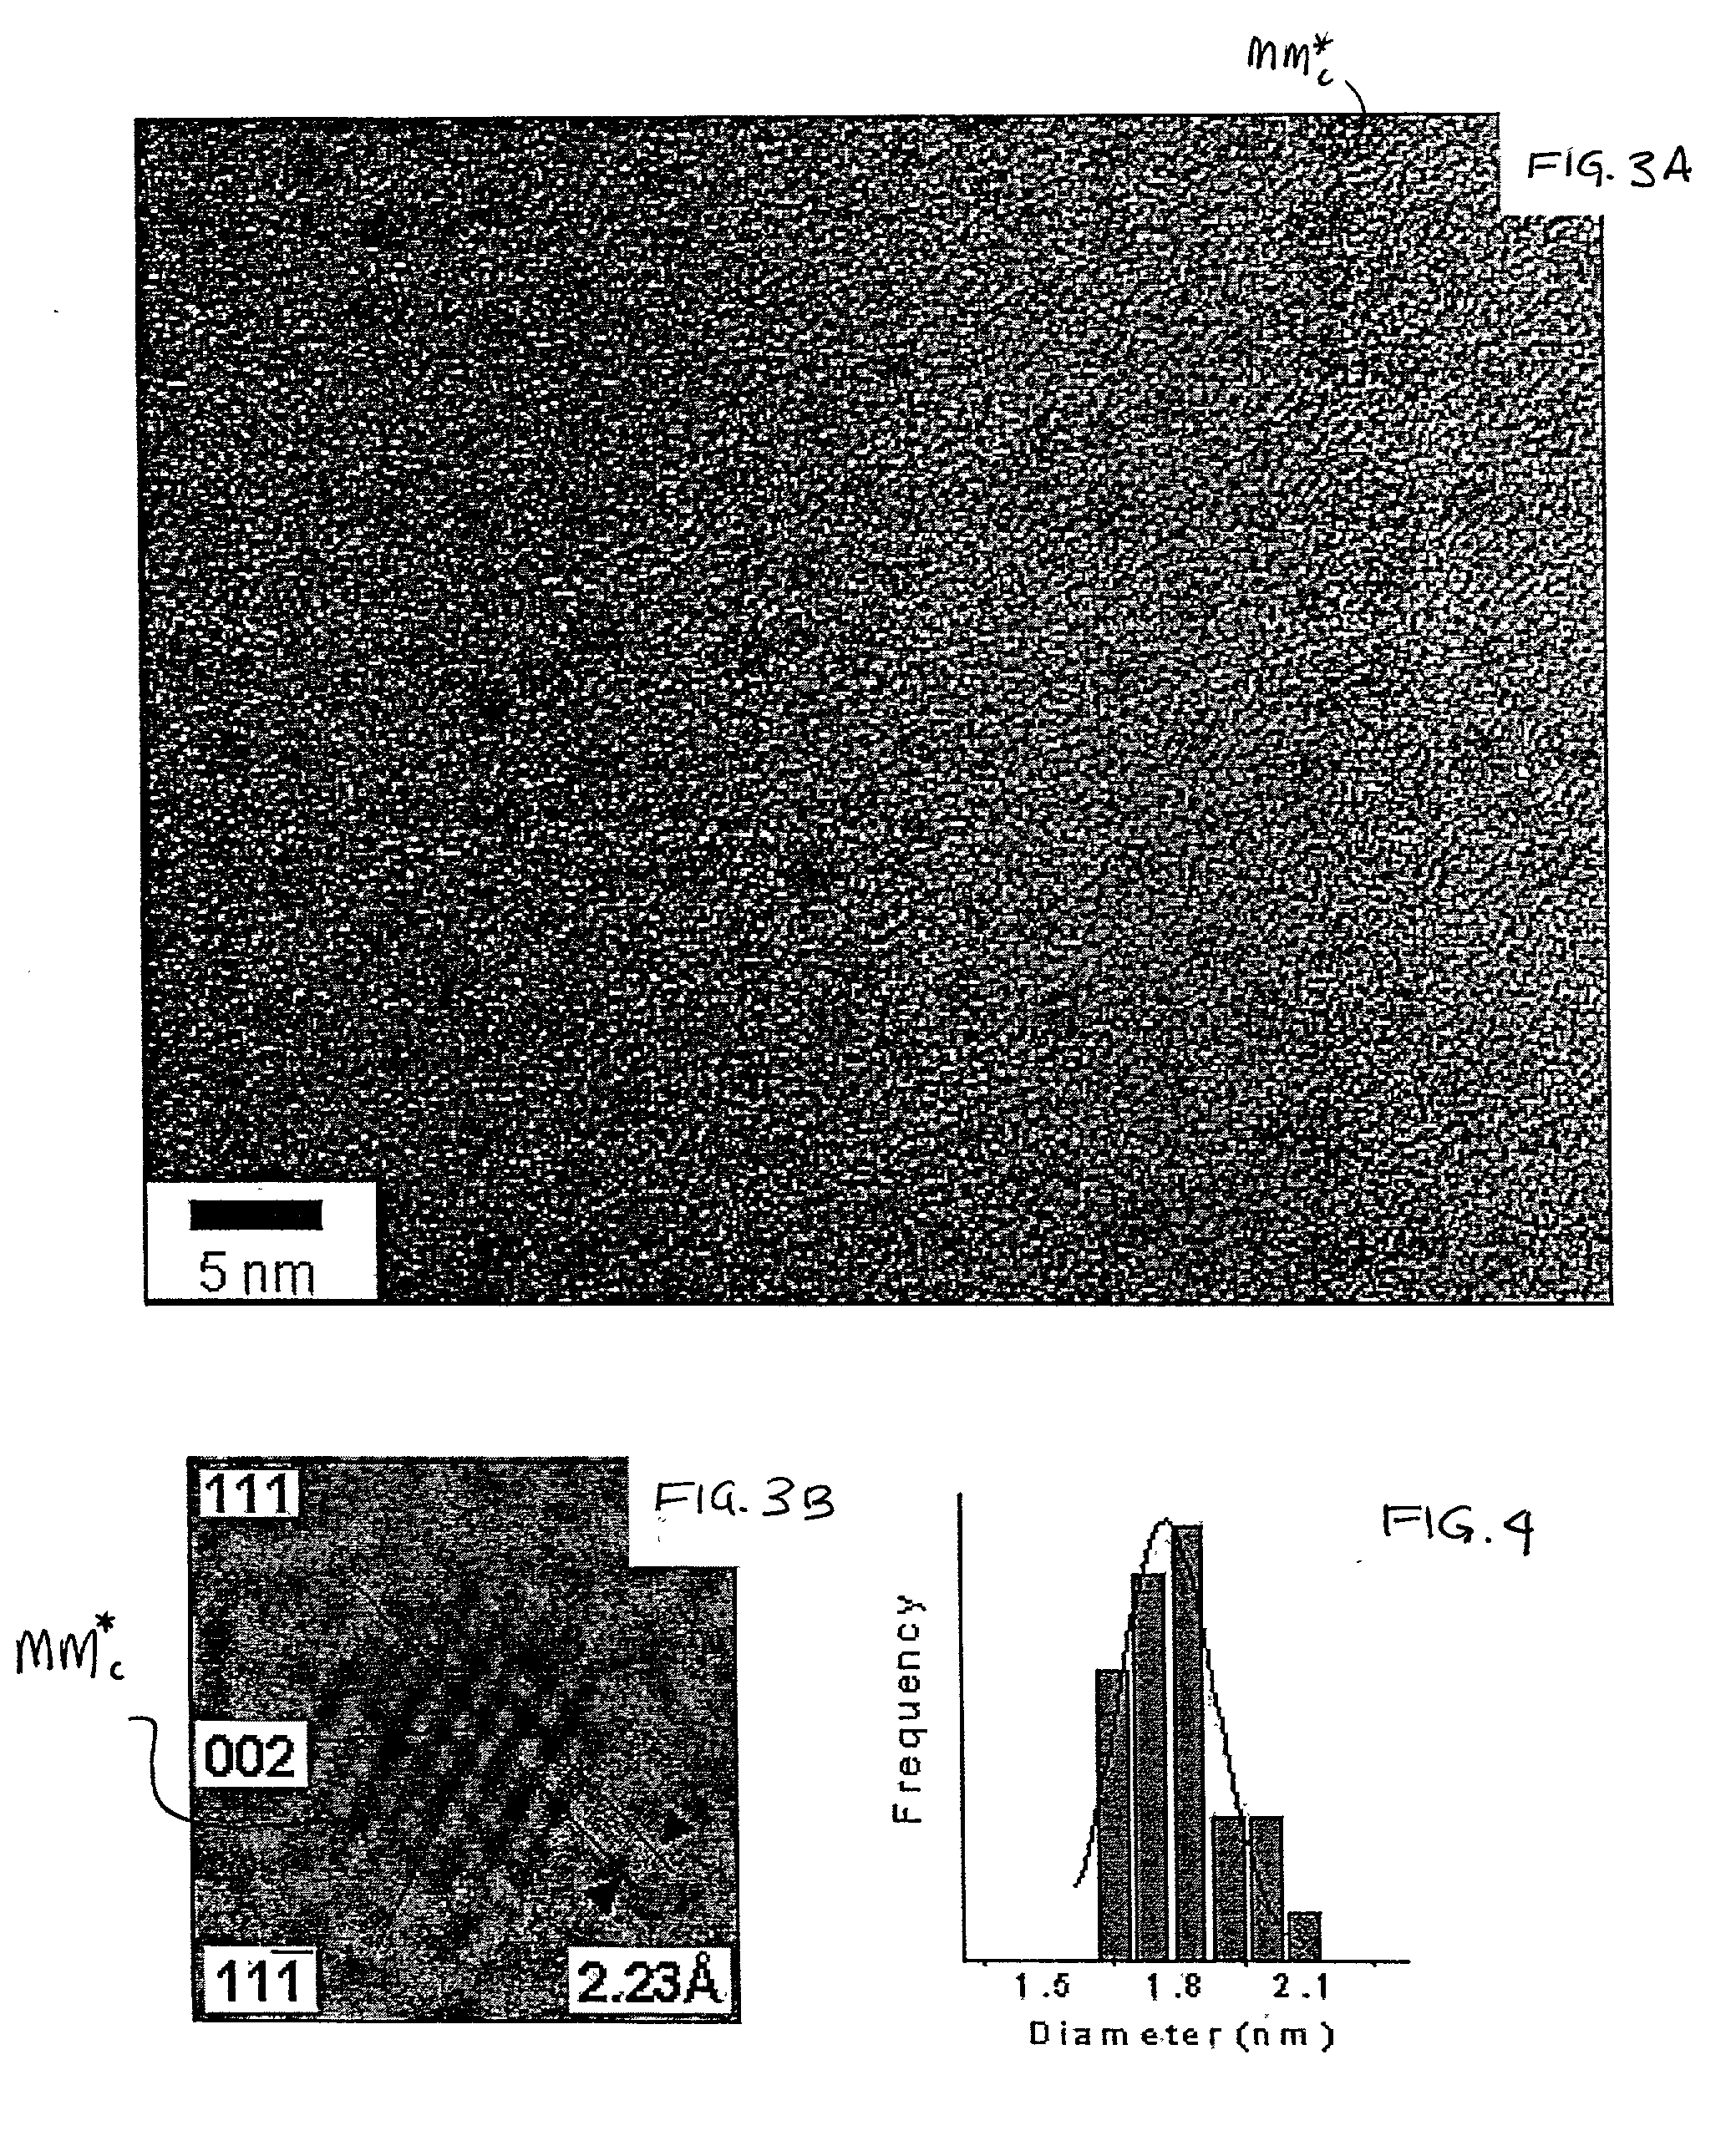 Method for synthesis of core-shell type and solid solution alloy type metallic nanoparticles via transmetalation reactions and applications of same